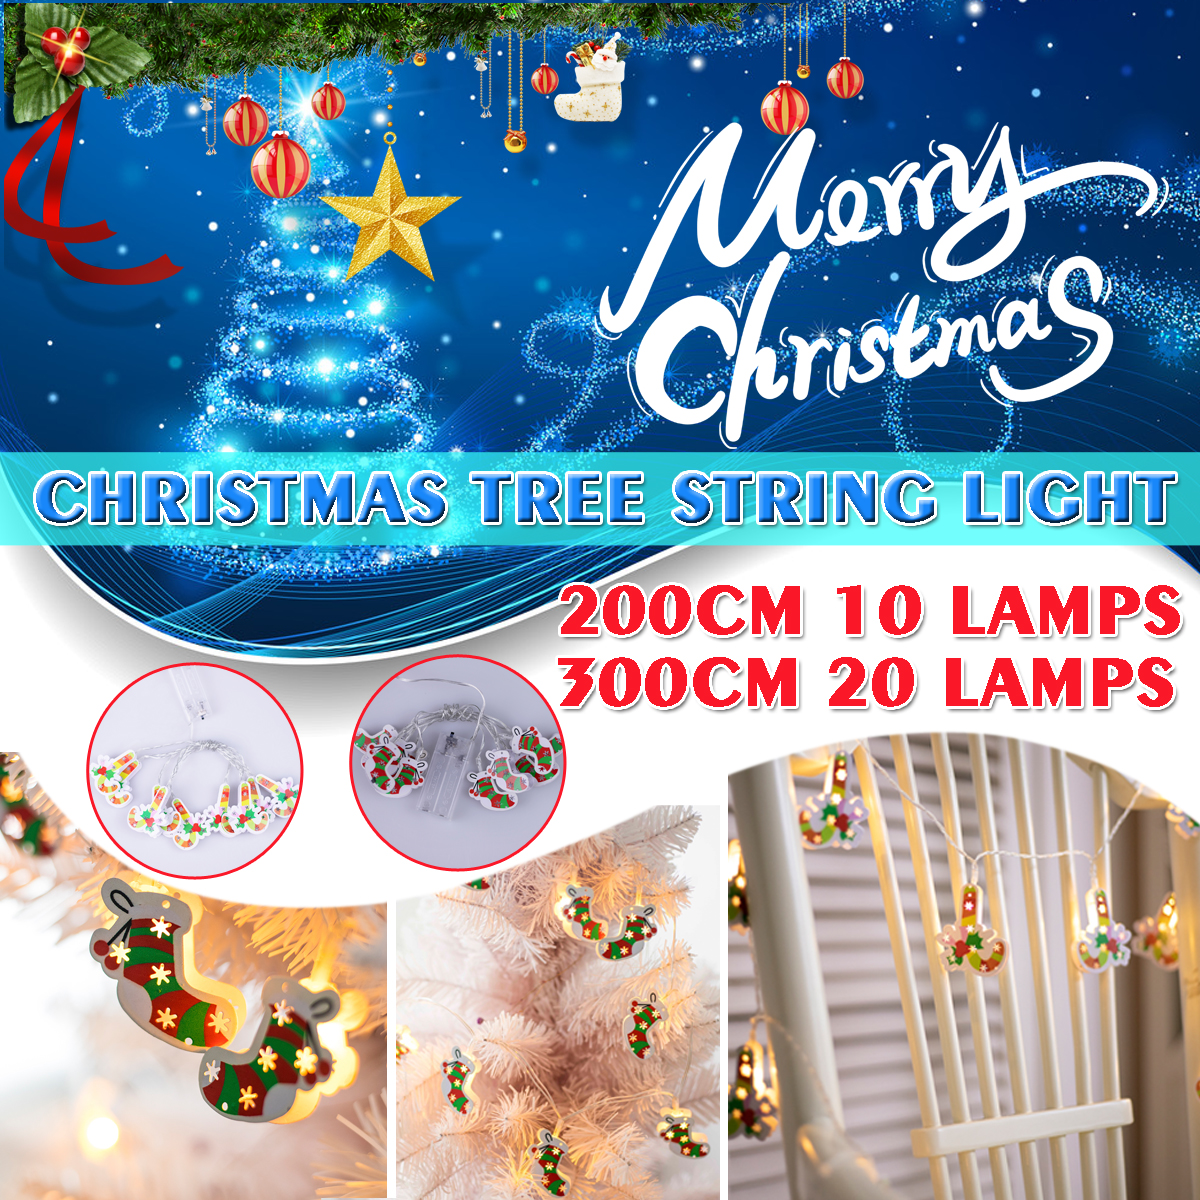 2M-3M-Christmas-SocksCrutches-Battery-Powered-LED-Decorative-Tree-String-Light-for-Festival-Party-1557807-1